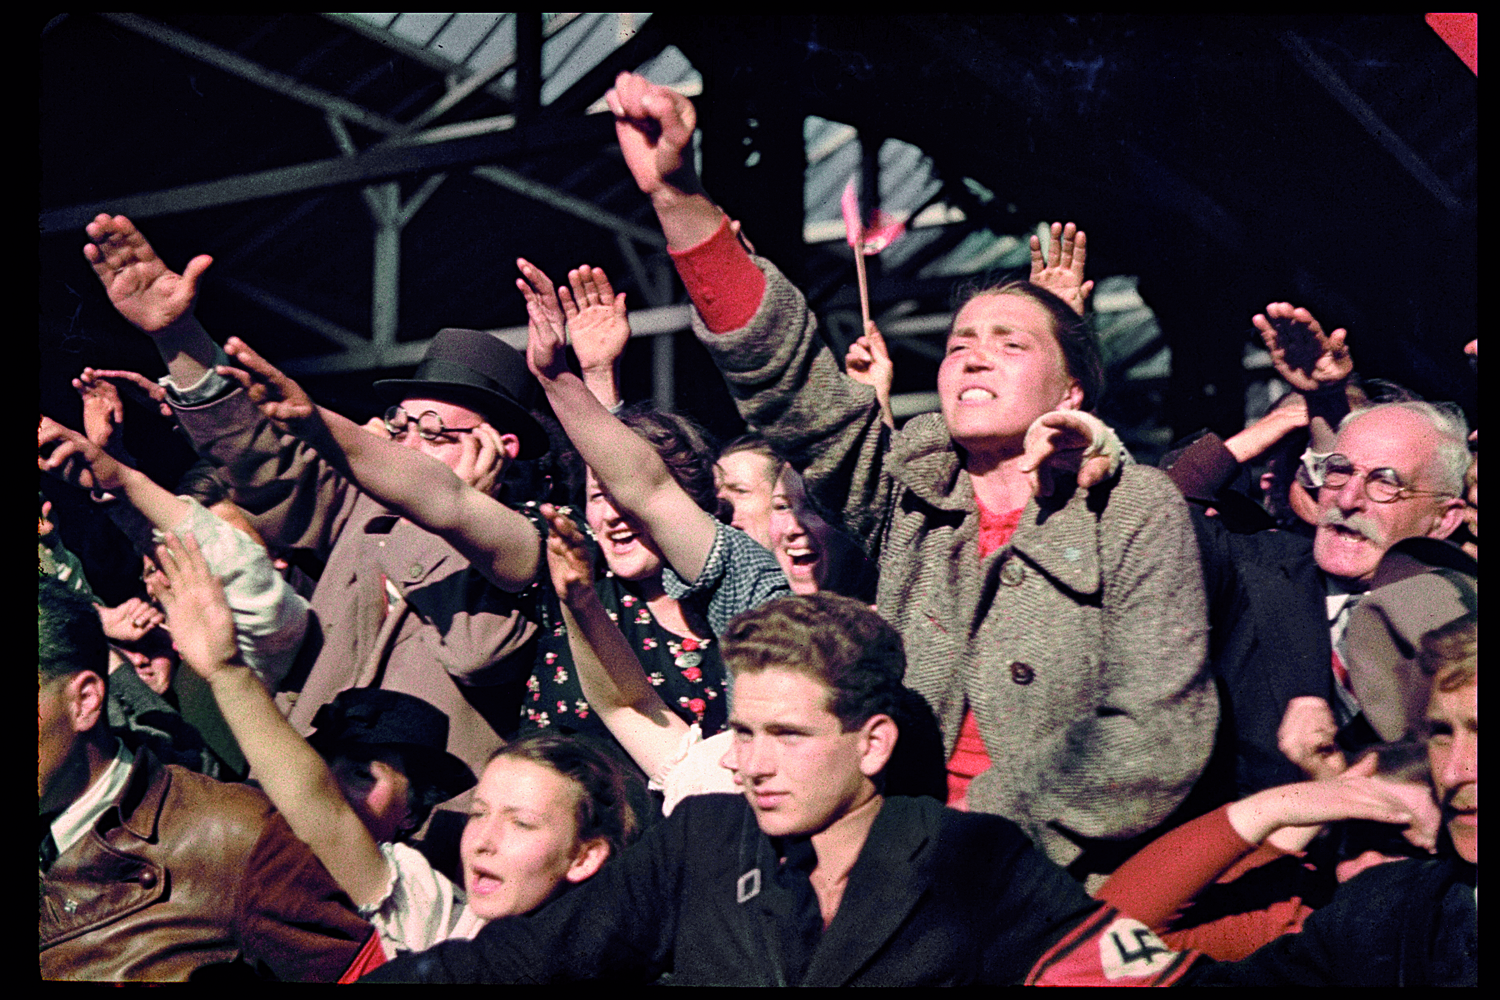 Austrians cheer Adolf Hitler during his 1938 campaign (before the Anschluss) to unite Austria and Germany.